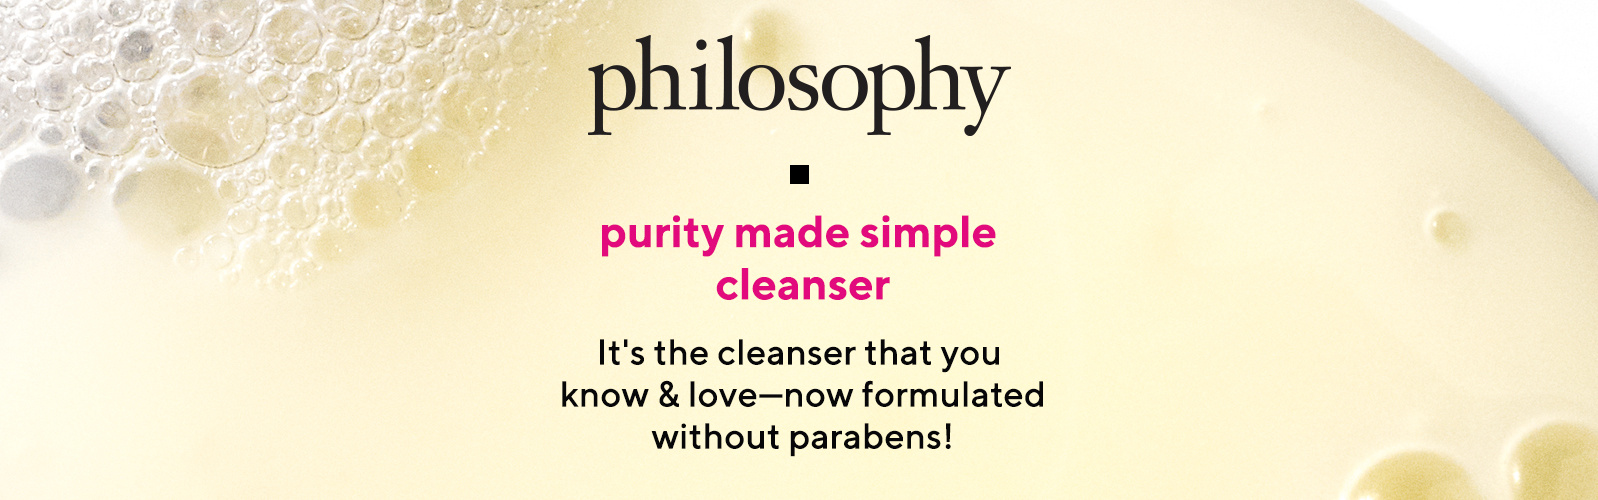 purity made simple cleanser - It's the cleanser that you know & love—now formulated without parabens!